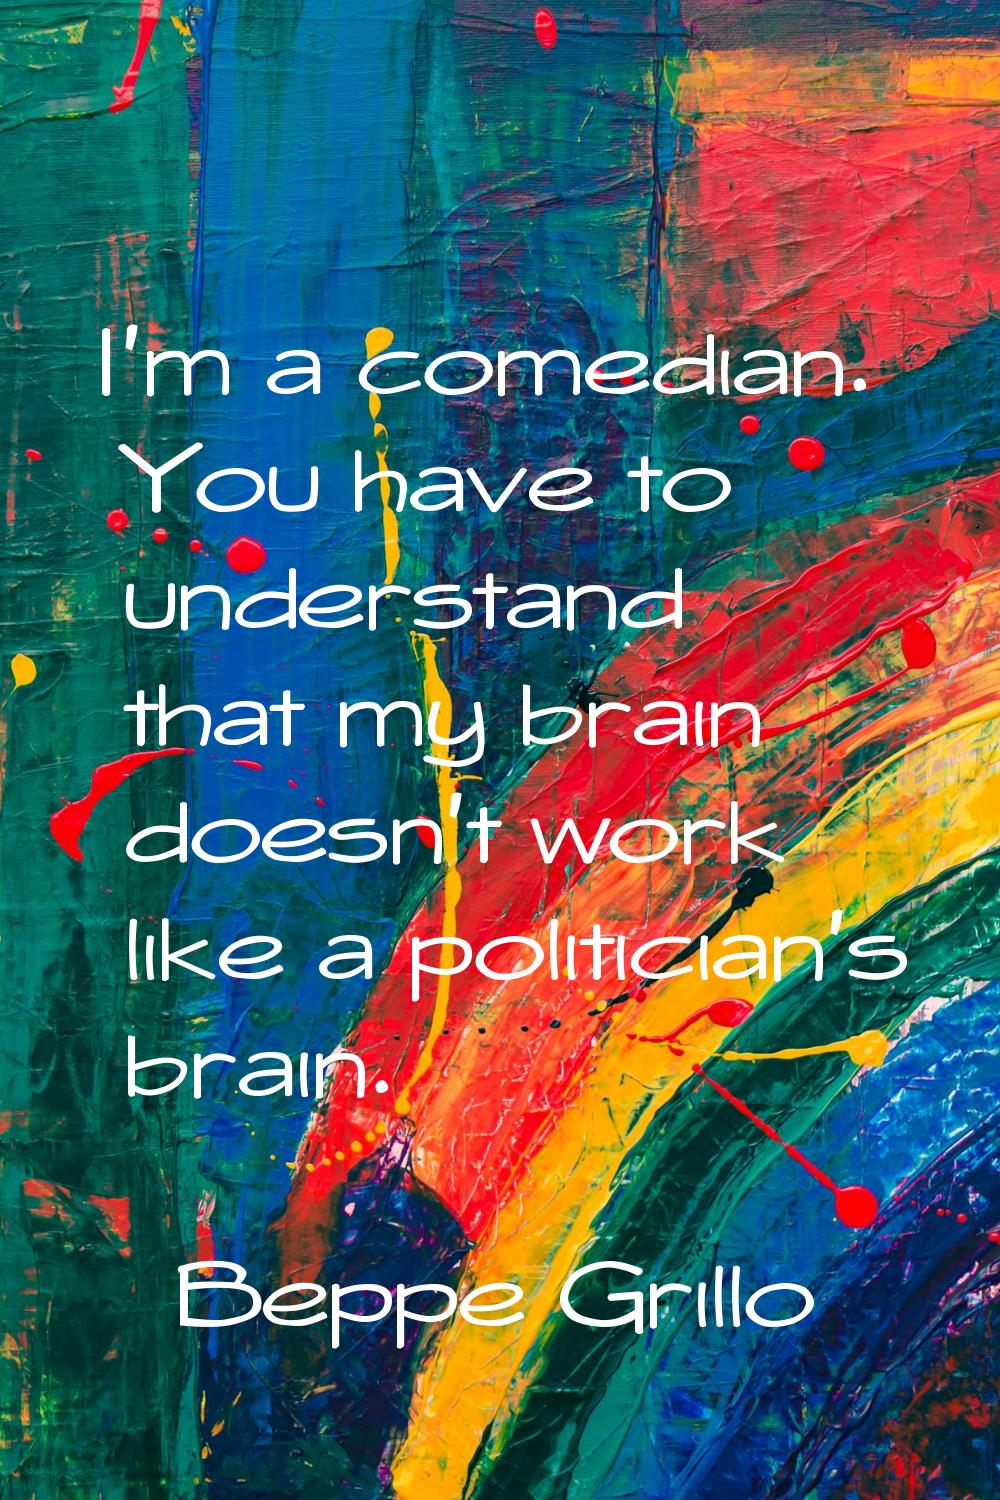 I'm a comedian. You have to understand that my brain doesn't work like a politician's brain.